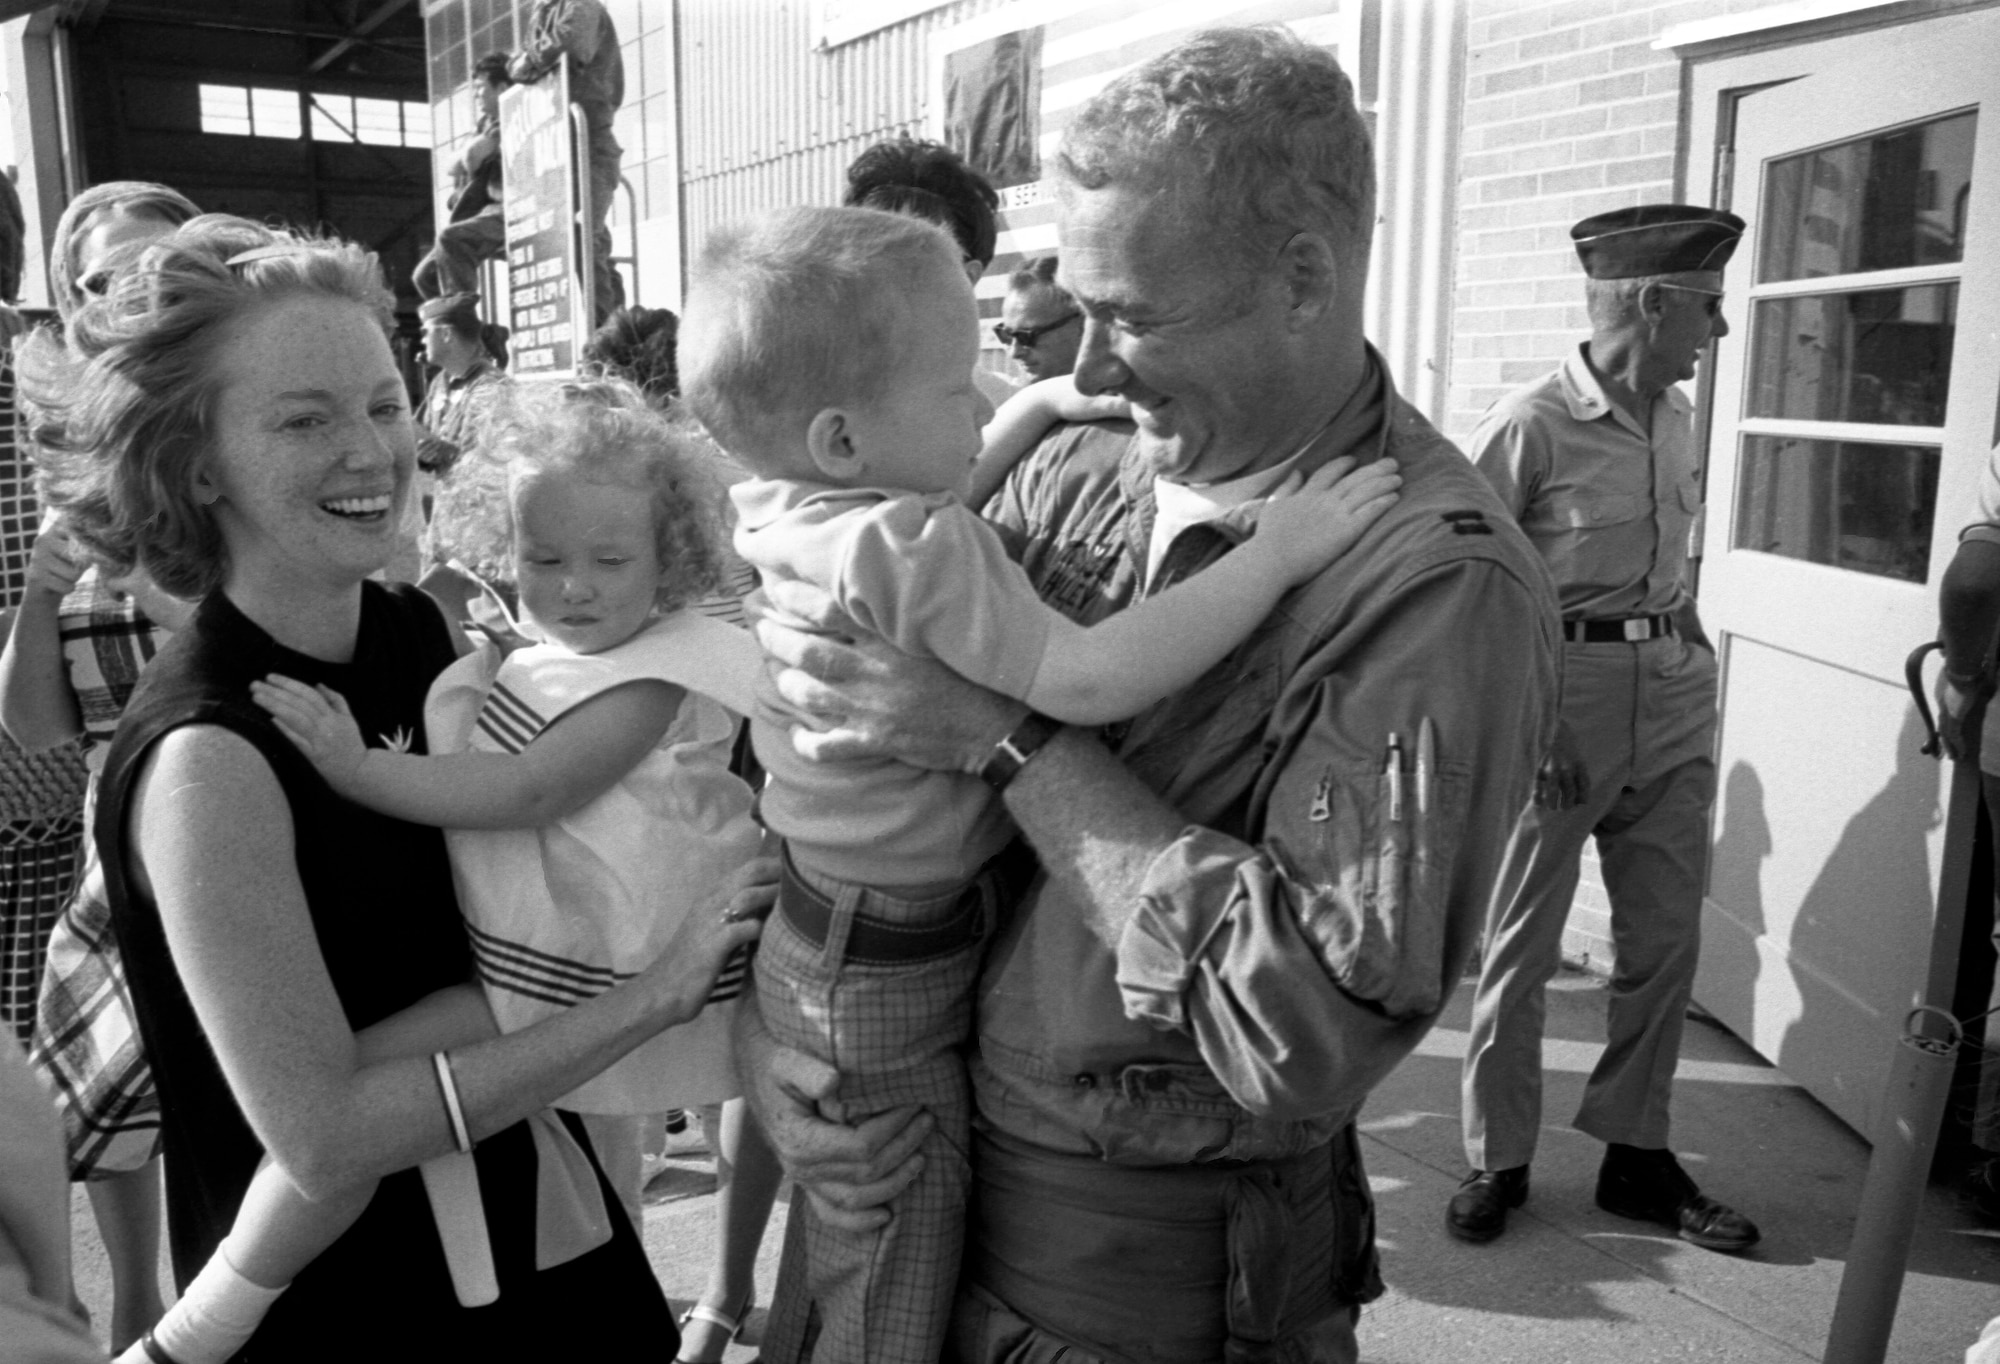 Iowa Air National Guard Captain, John Haley an F-100 fighter pilot with the 185th Tactical Fighter Group is greeted by his family in Sioux City, Iowa on May 14, 1969 after returning home from the war in Vietnam. Haley and the rest of the 185th are returning home from yearlong duty at Phu Cat Airbase in South Vietnam. (U.S. Air National Guard photo/released 185th TFG Photo)